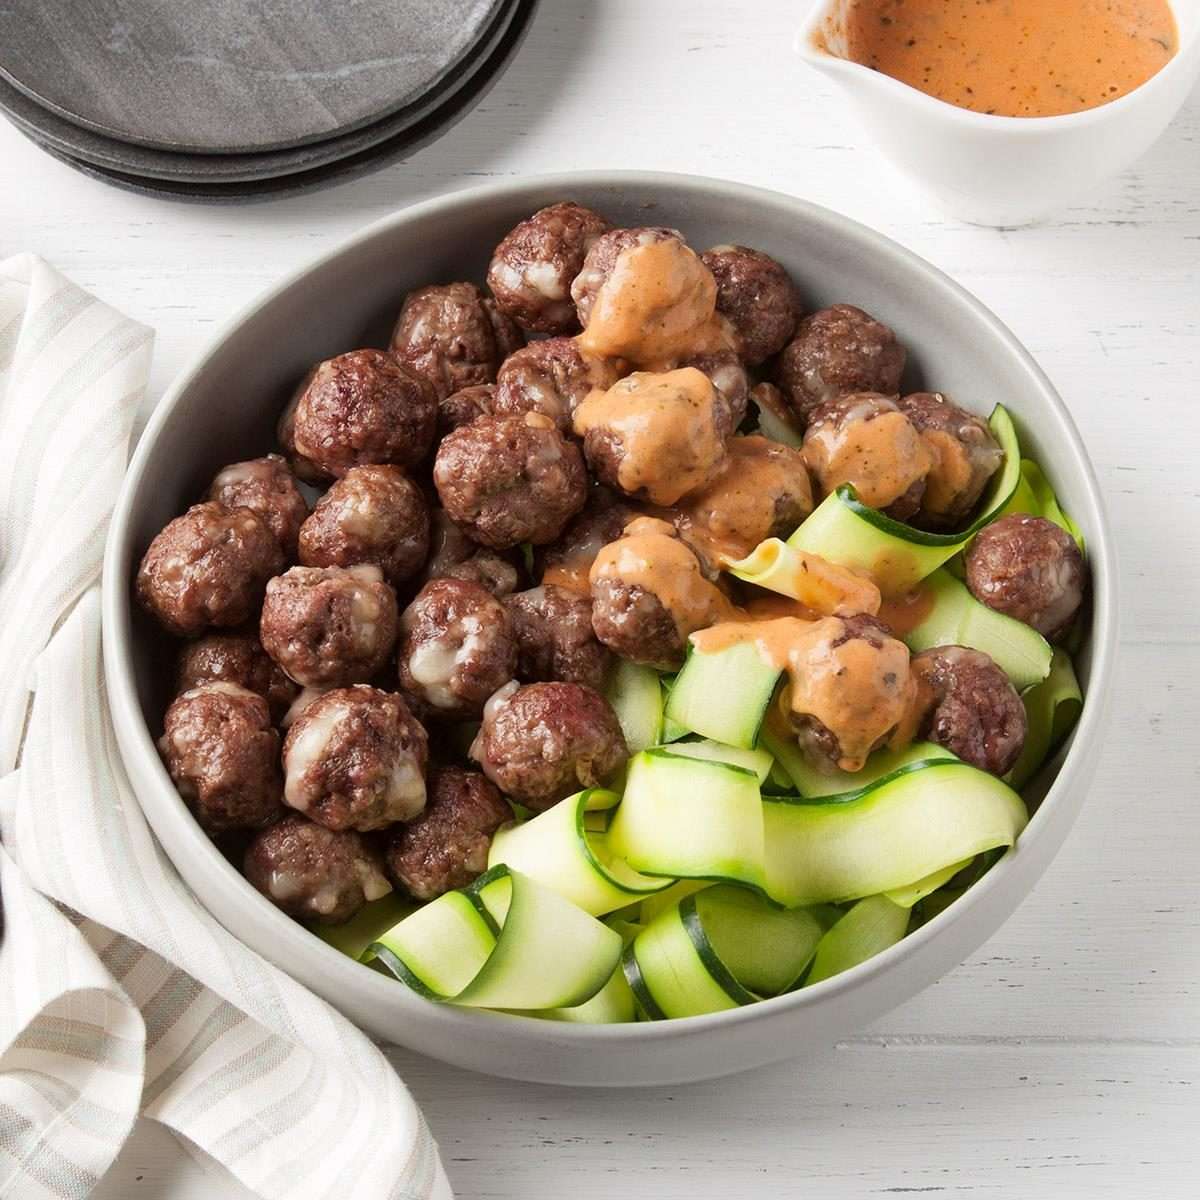 Keto Meatballs and Sauce Recipe: How to Make It